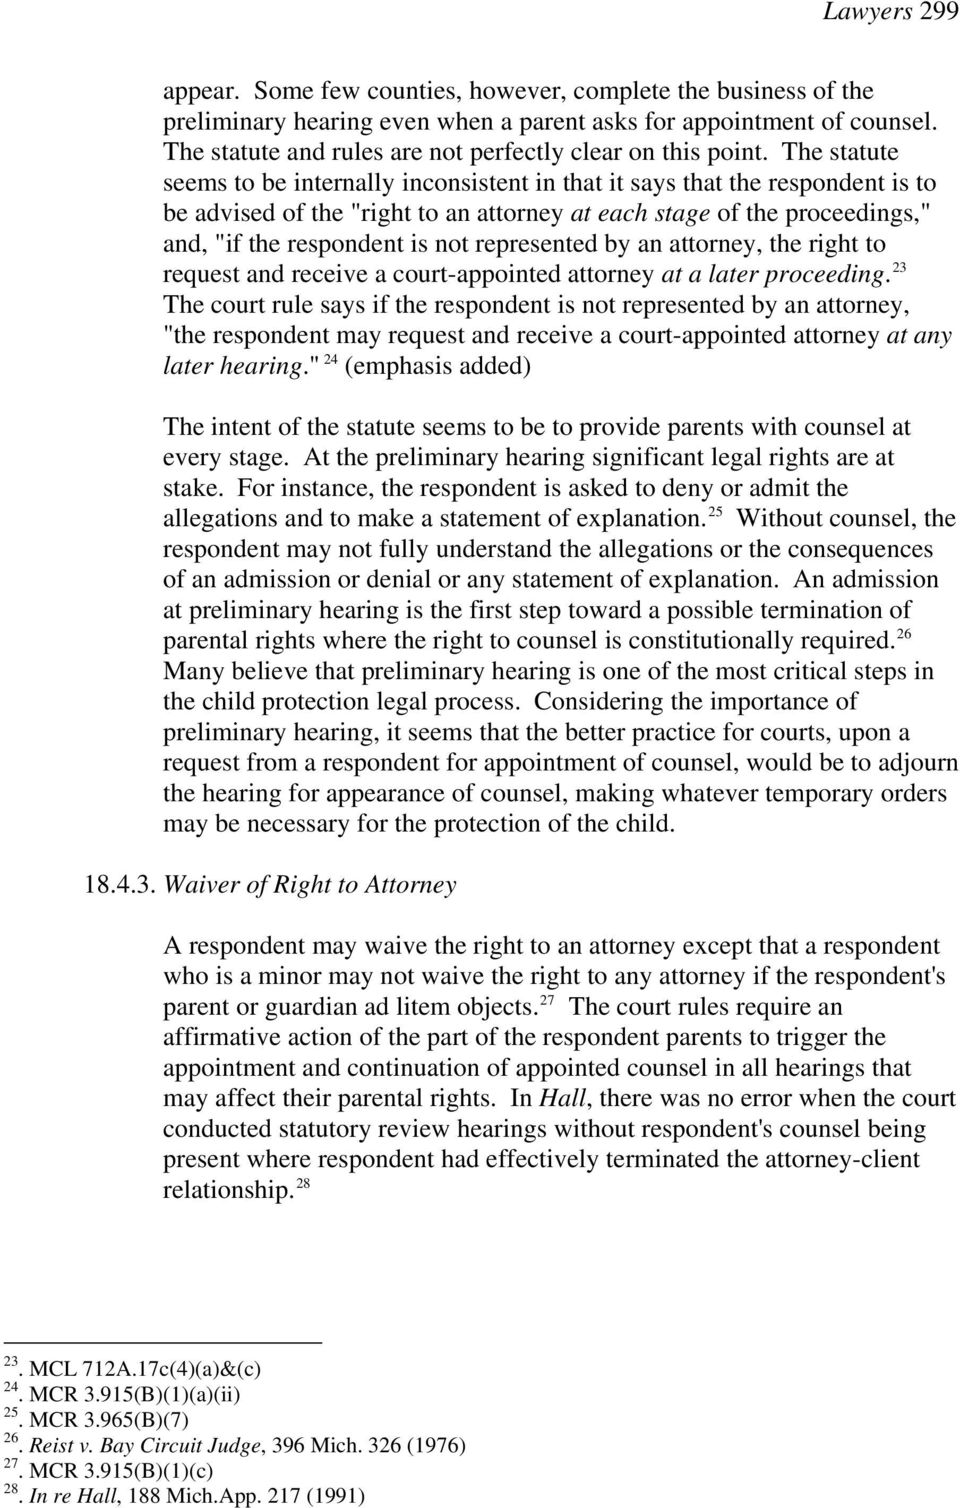 The statute seems to be internally inconsistent in that it says that the respondent is to be advised of the "right to an attorney at each stage of the proceedings," and, "if the respondent is not